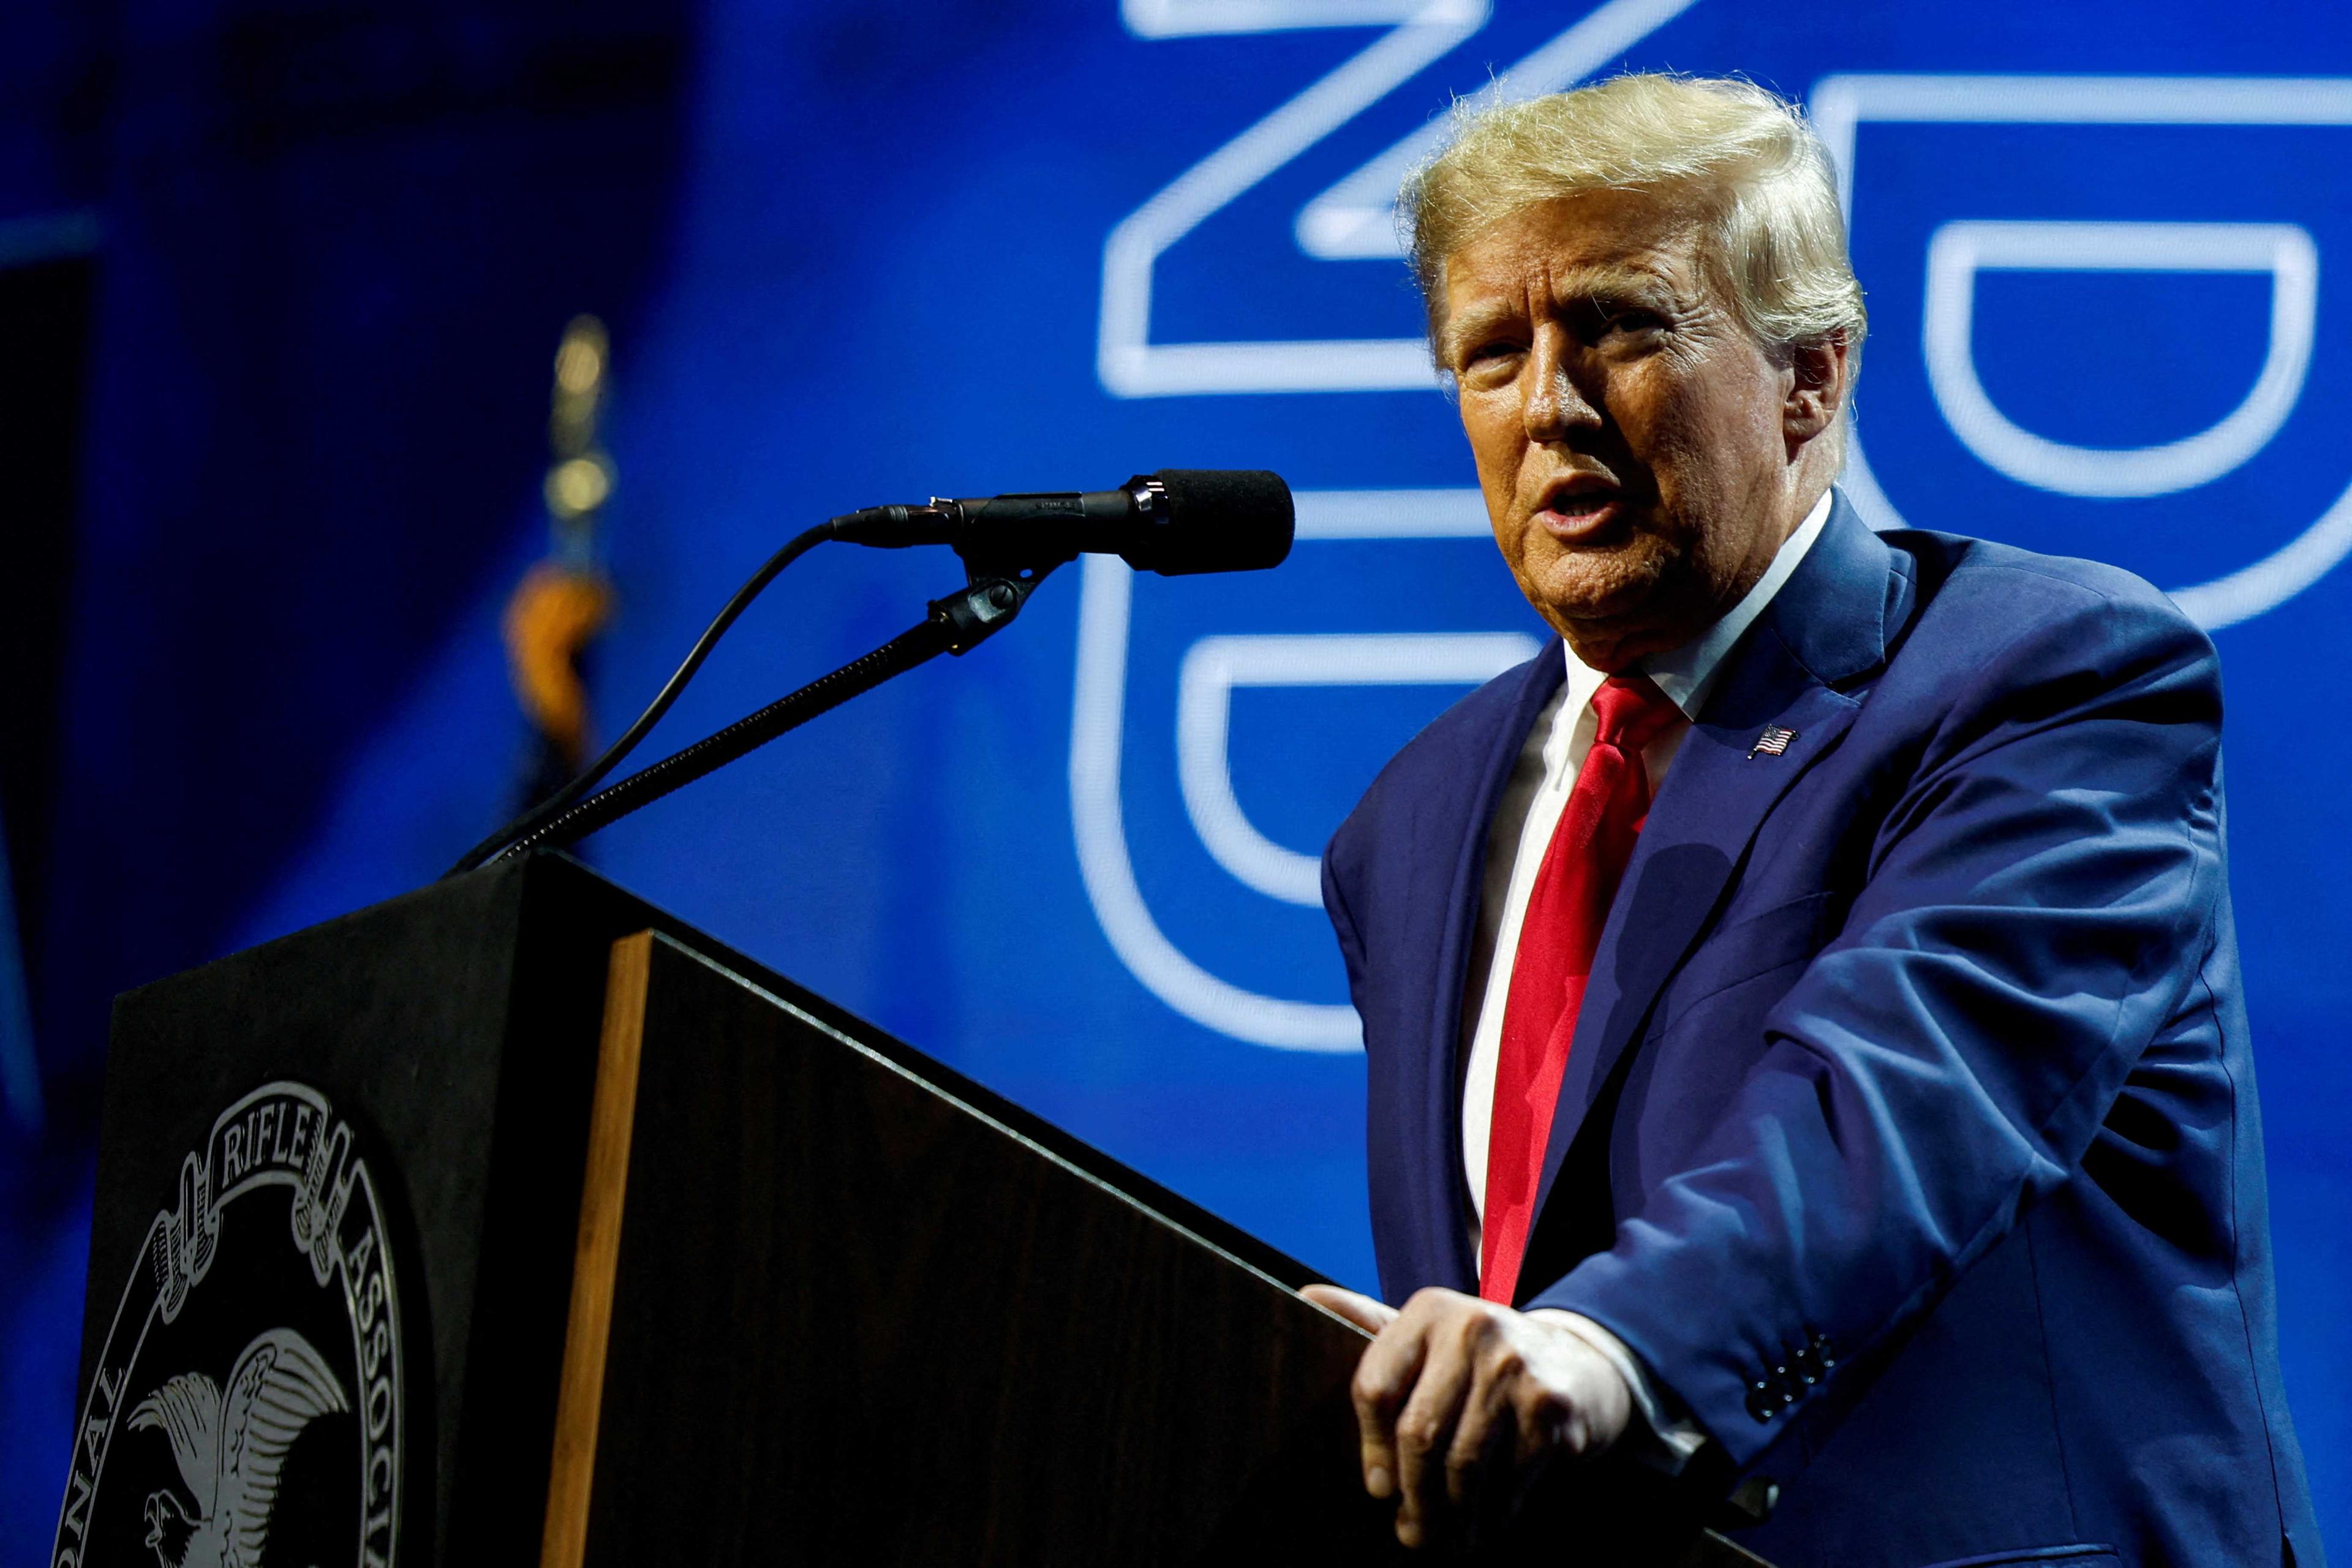 Former US president Donald Trump speaks the National Rifle Association (NRA) annual convention in Indianapolis, Indiana, US, April 14. Photo: Reuters